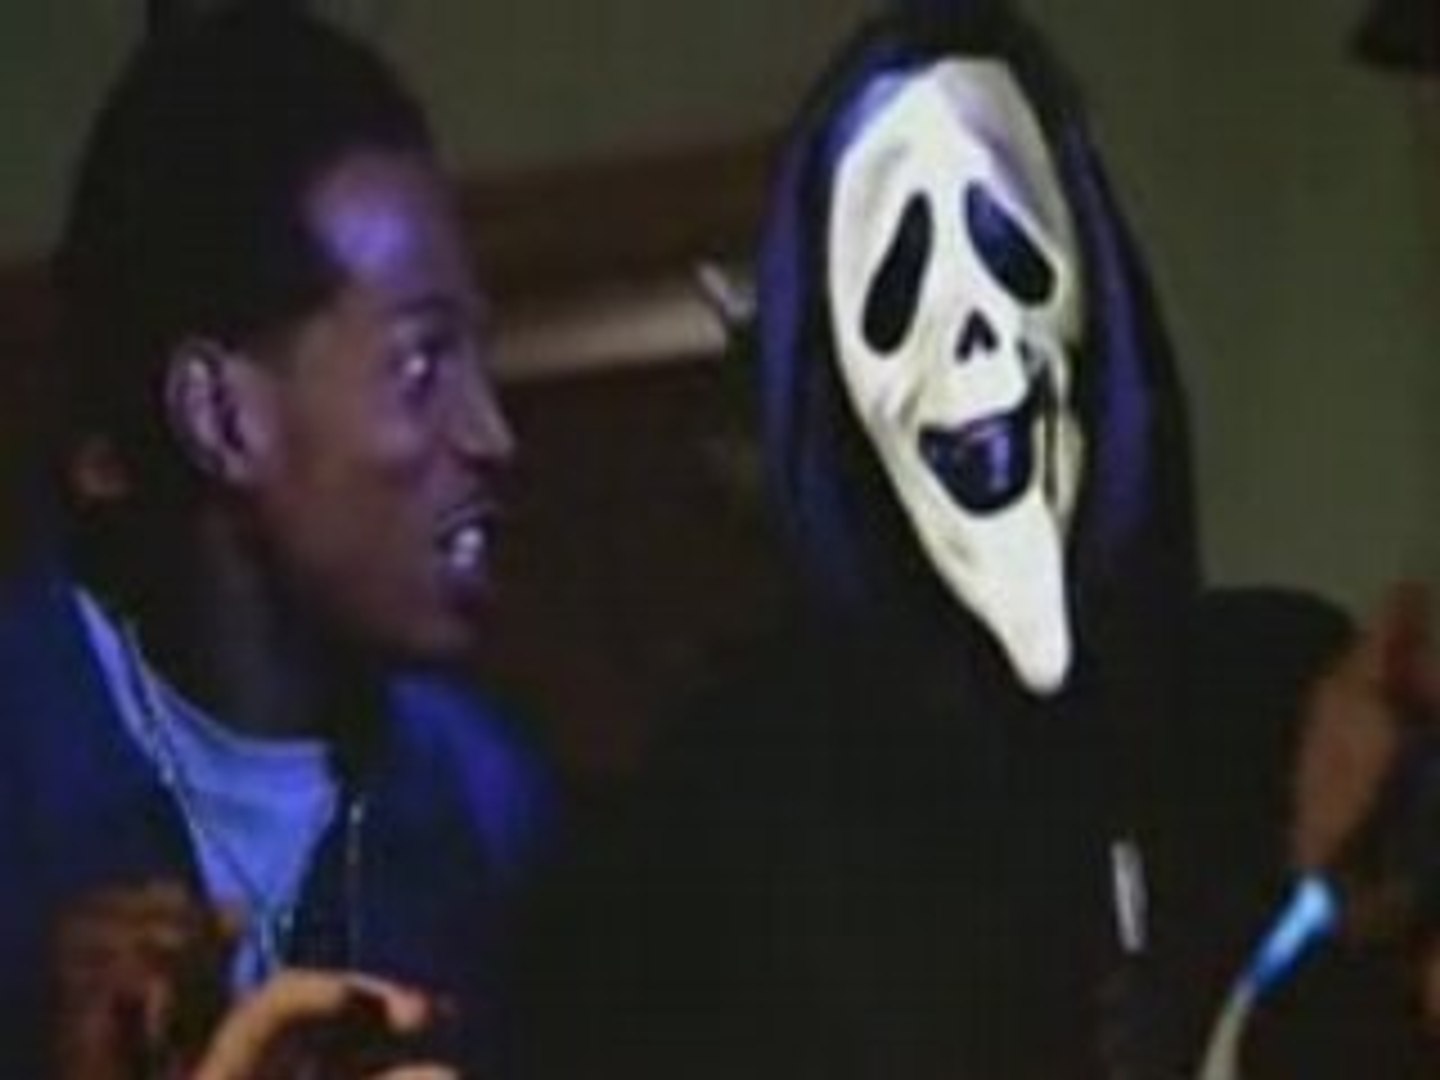 Funny Scene From Scary Movie - video Dailymotion